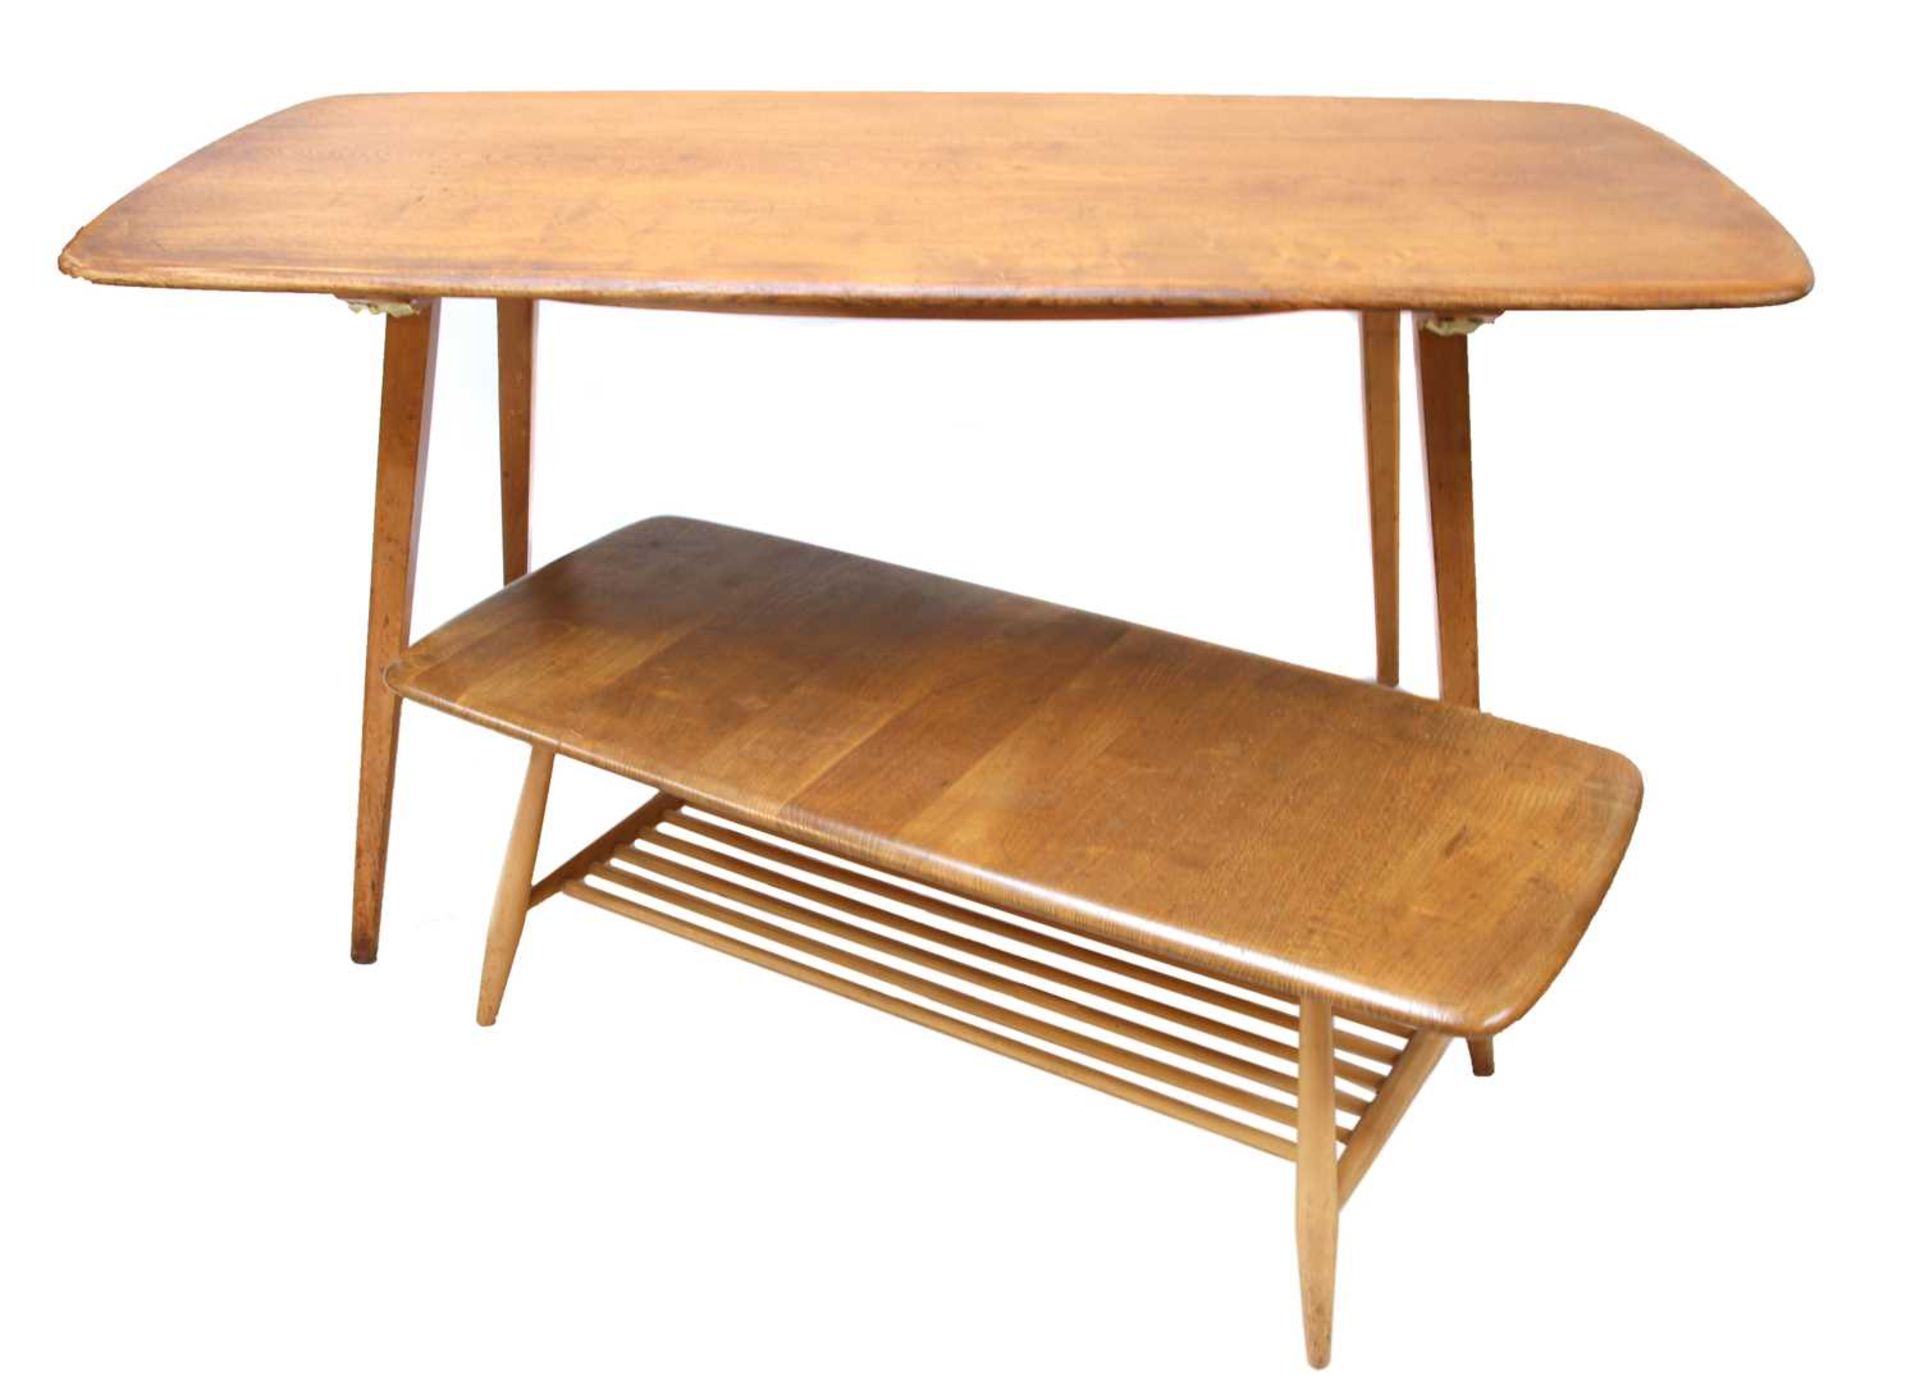 An Ercol dining table,